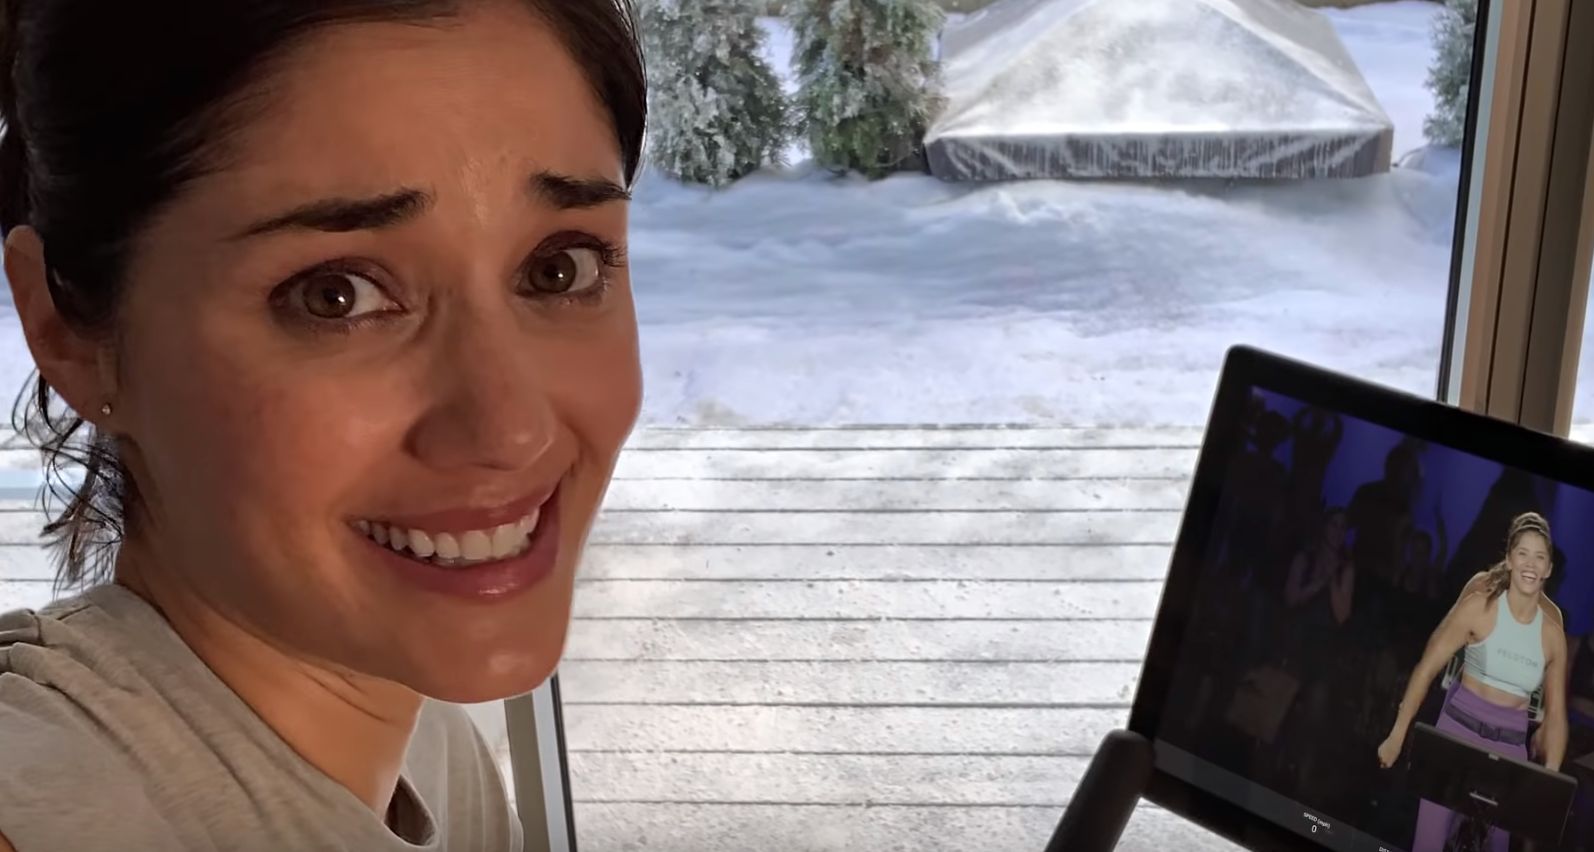 People Are Very Concerned For The Woman In Pelotonâ€™s Christmas Ad